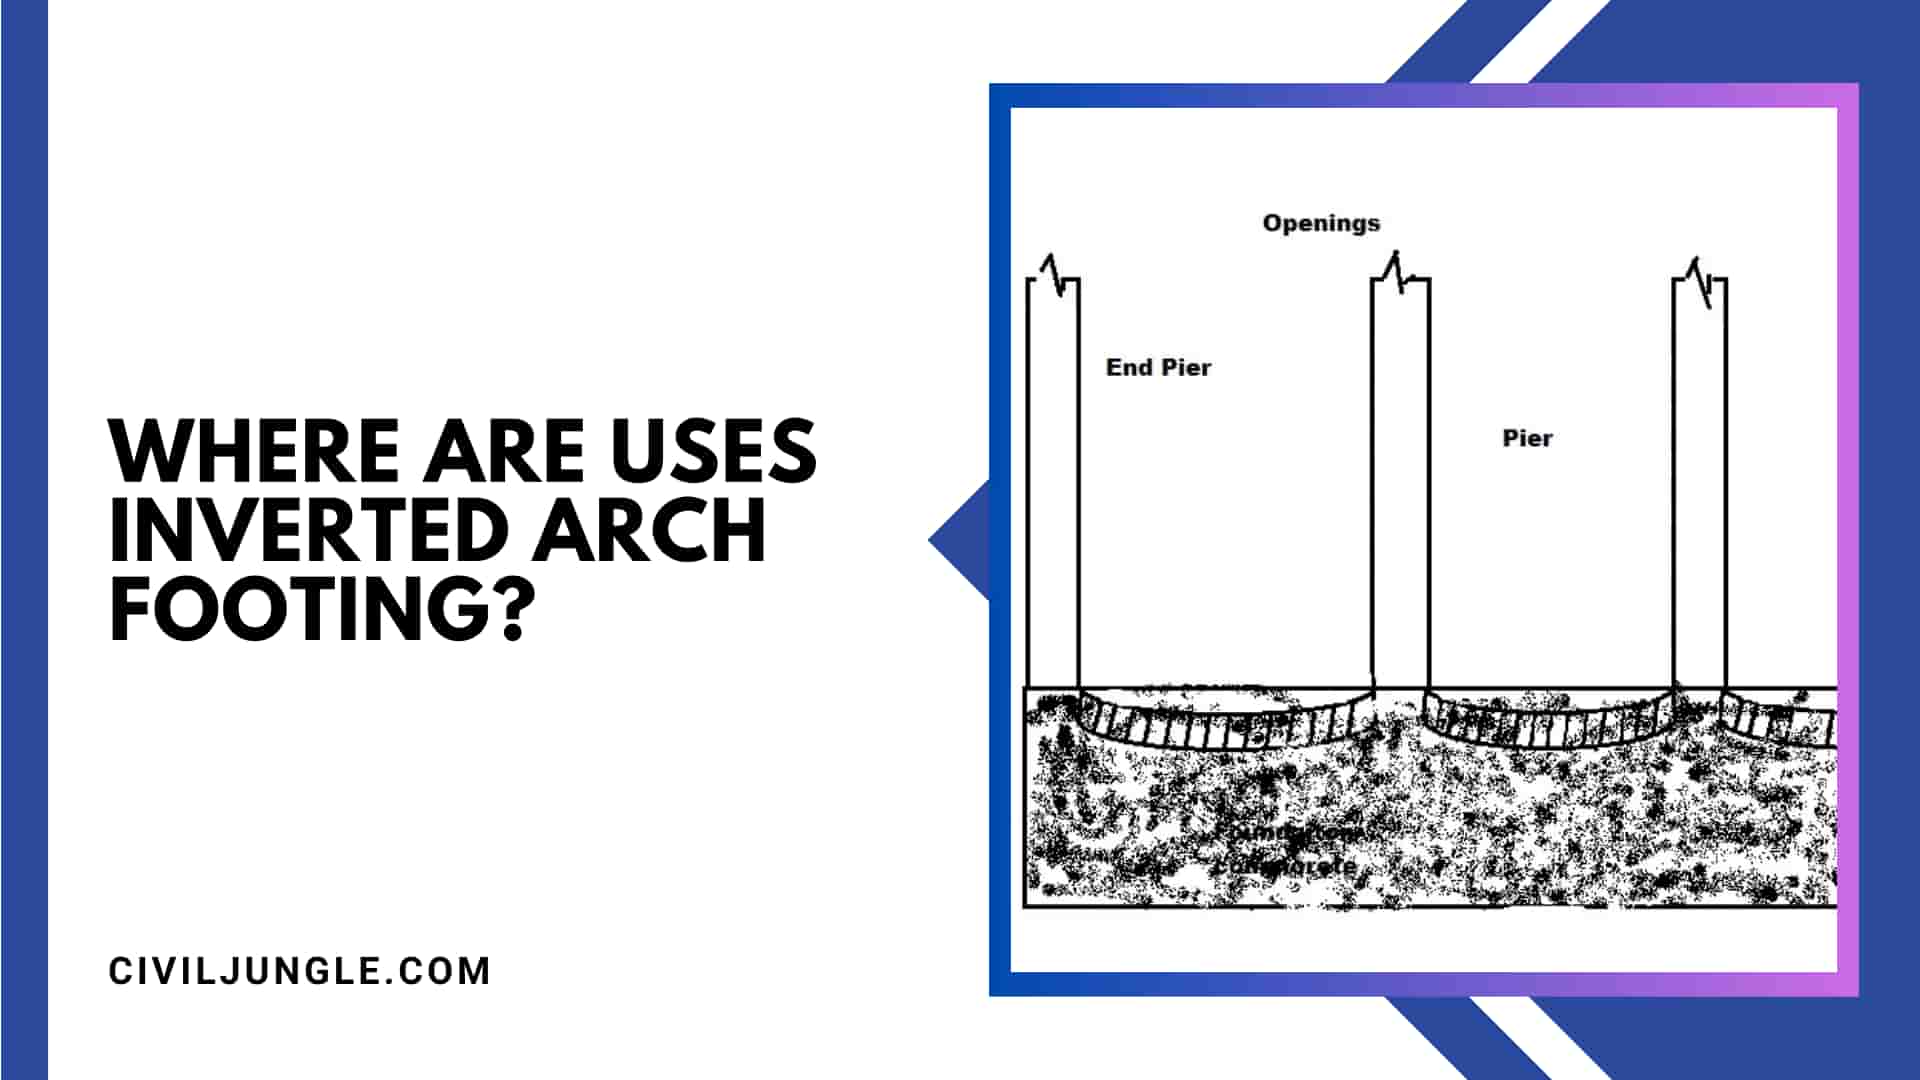 Where Are Uses Inverted Arch Footing?